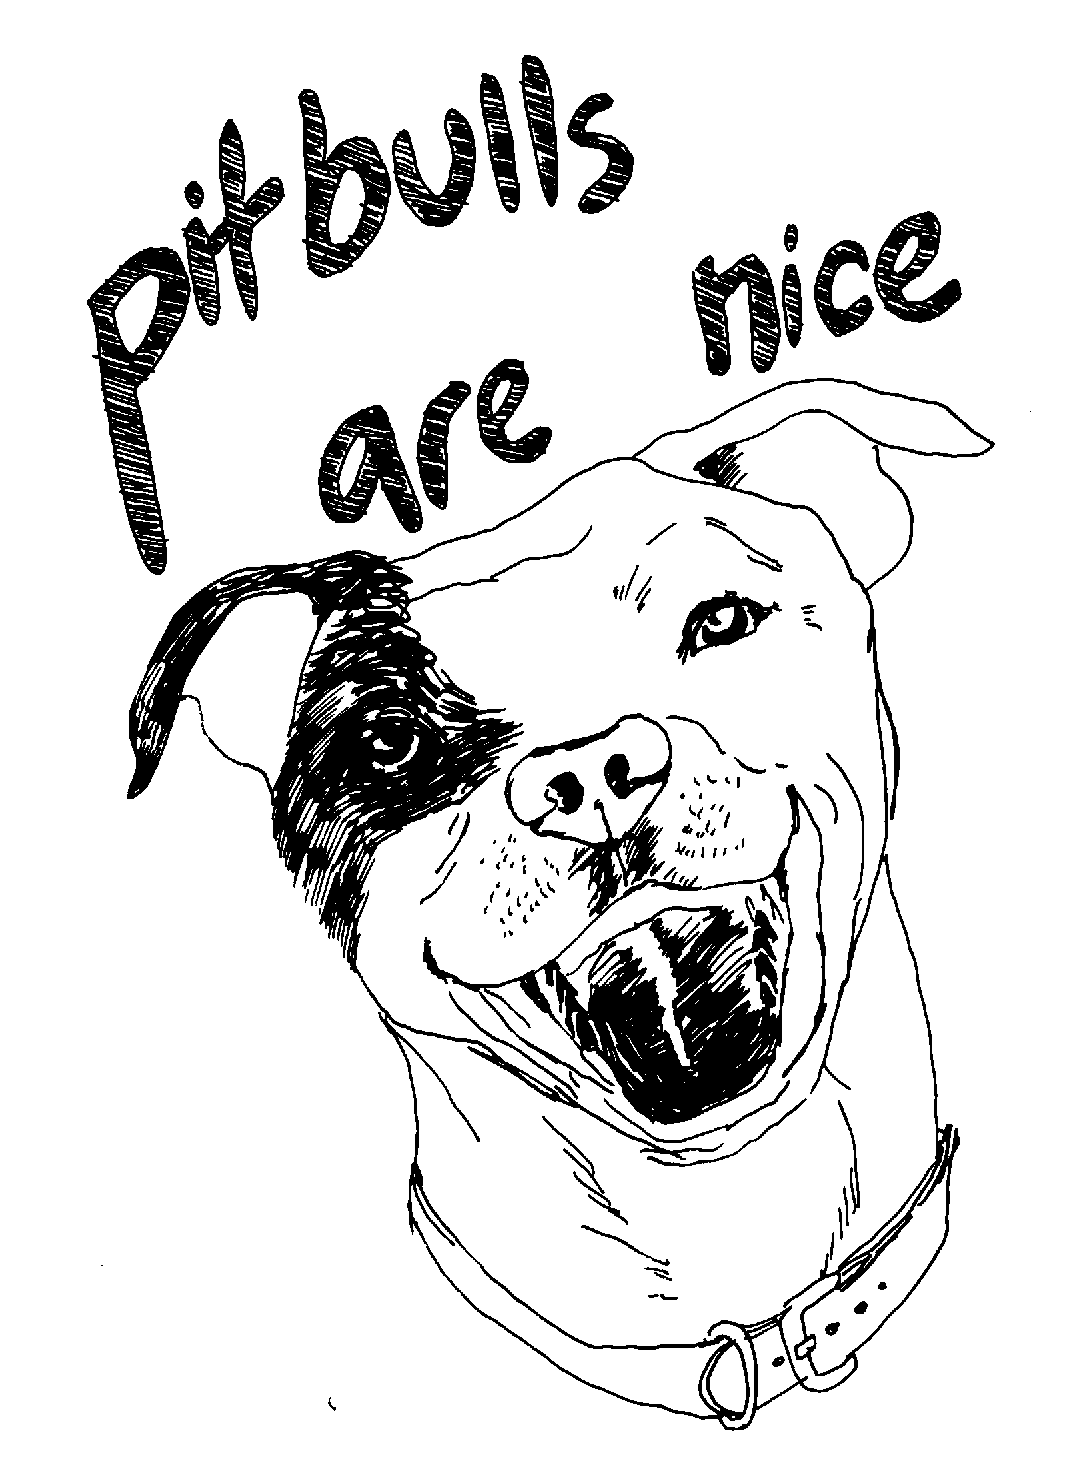 Coloring Pictures Of Pitbulls - Coloring Pages for Kids and for Adults